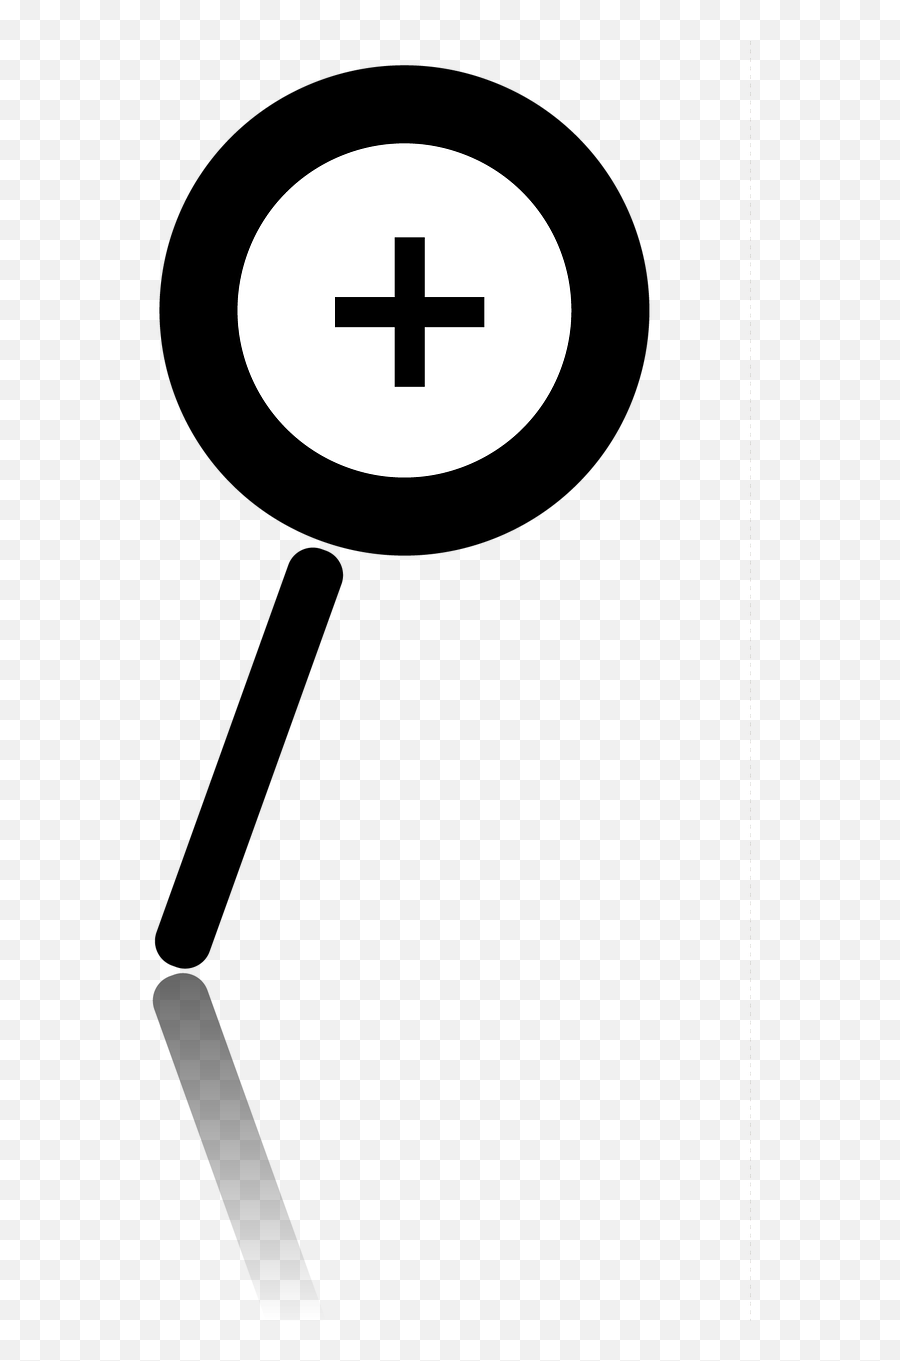 Magnifying Glass Search Glass To Find - Cross Emoji,Find The Emoji Magnifying Glass